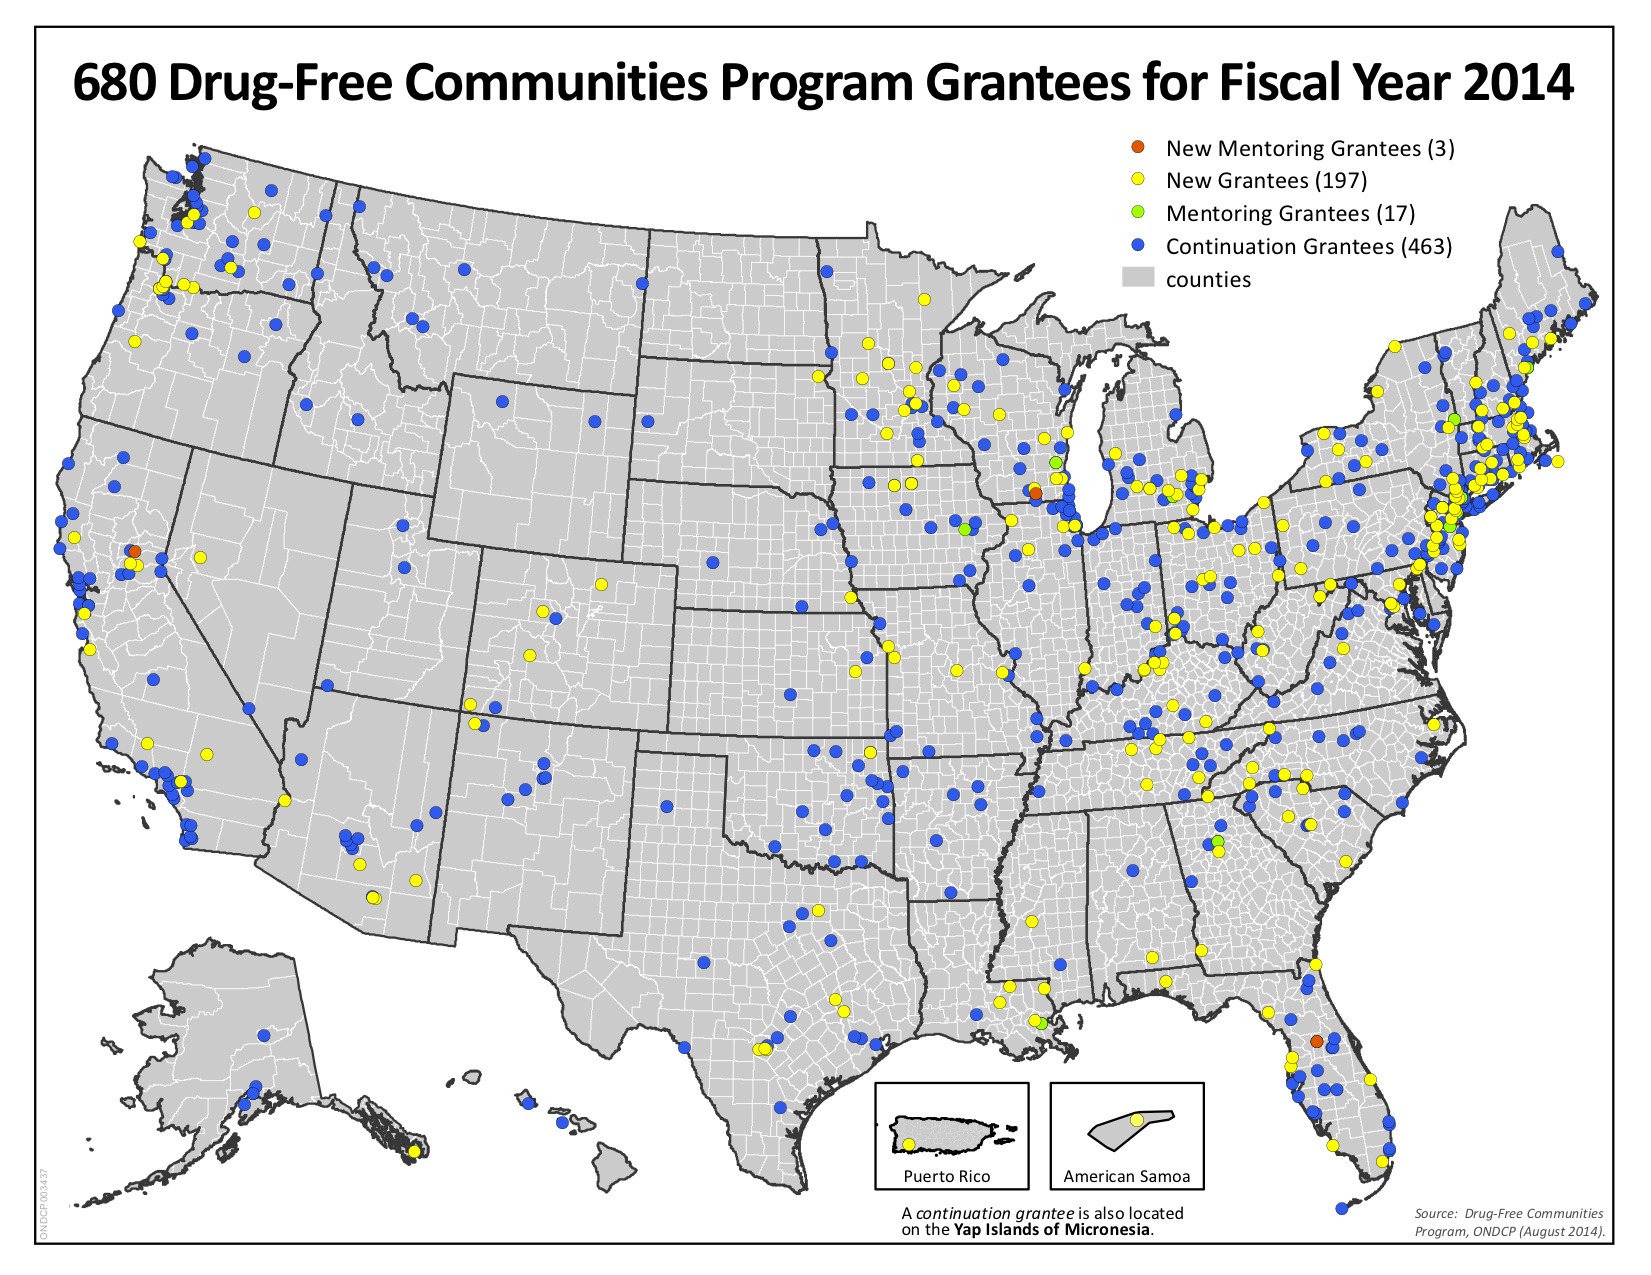 680 Drug-Free Communities Program Grantees for Fiscal Year 2014